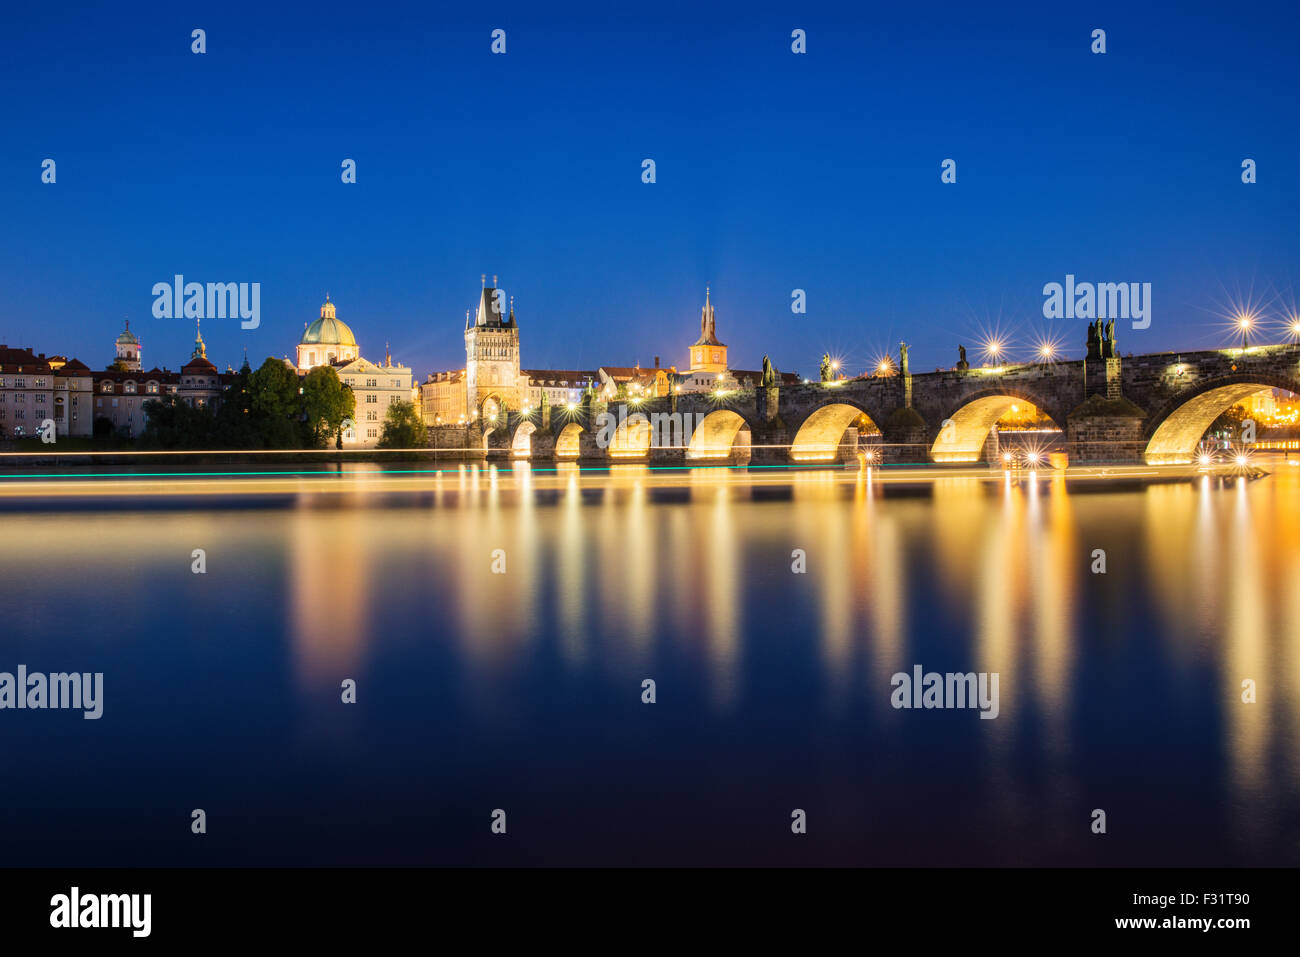 Night view of colorful old town and Charles Bridge with river Vltava, Prague, Czech Republic Stock Photo